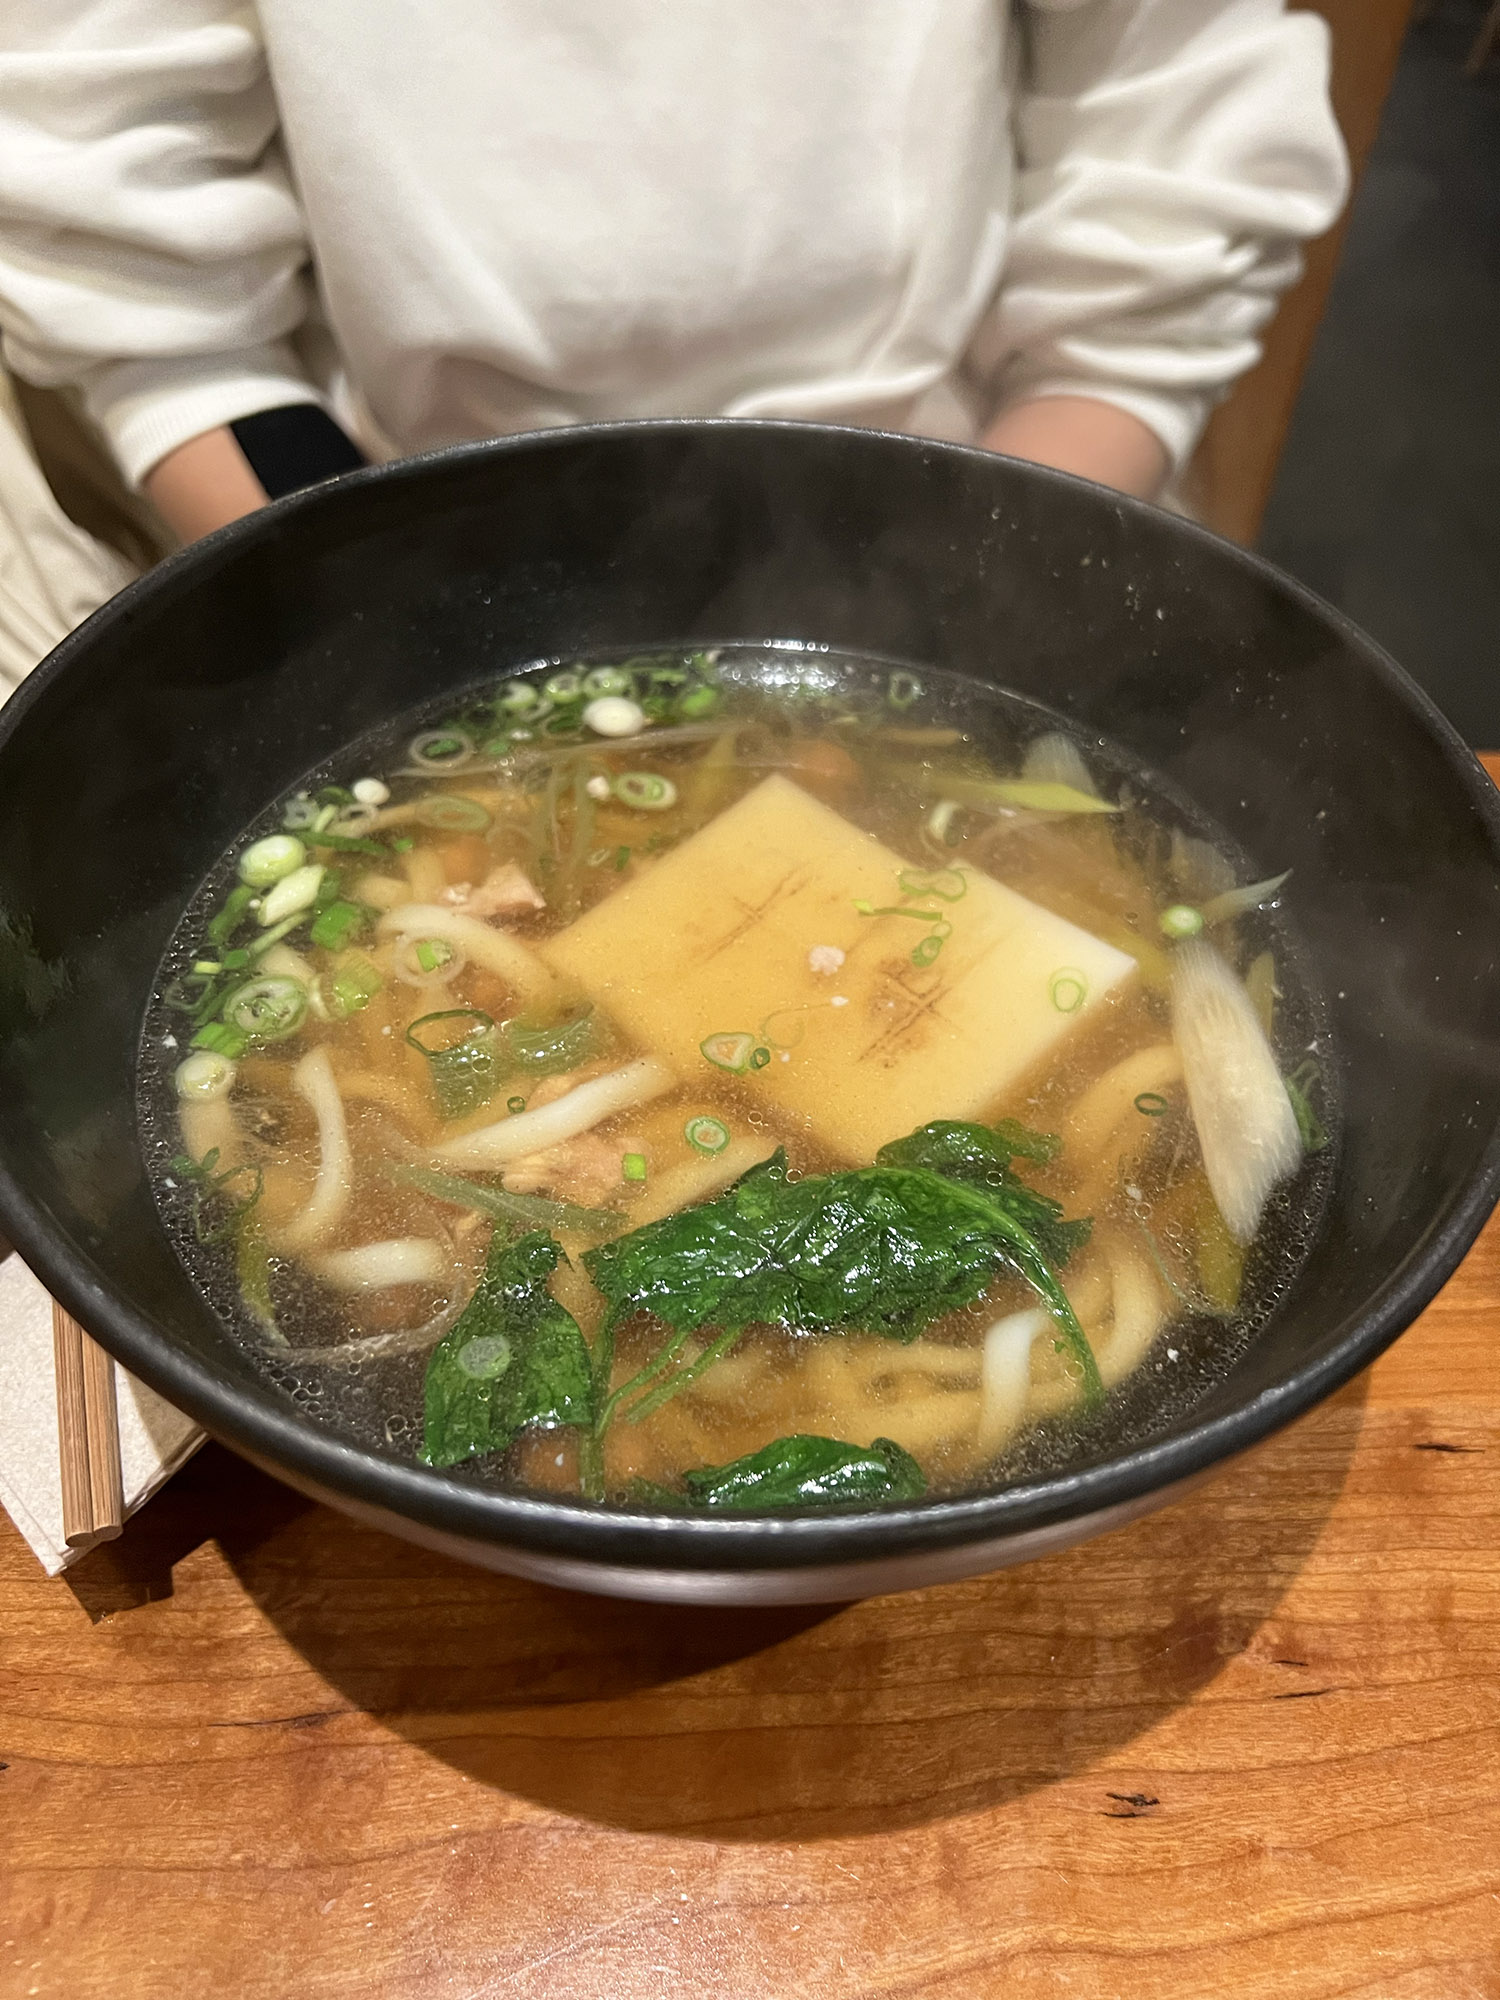 NYC: Raku - the place to go for udon